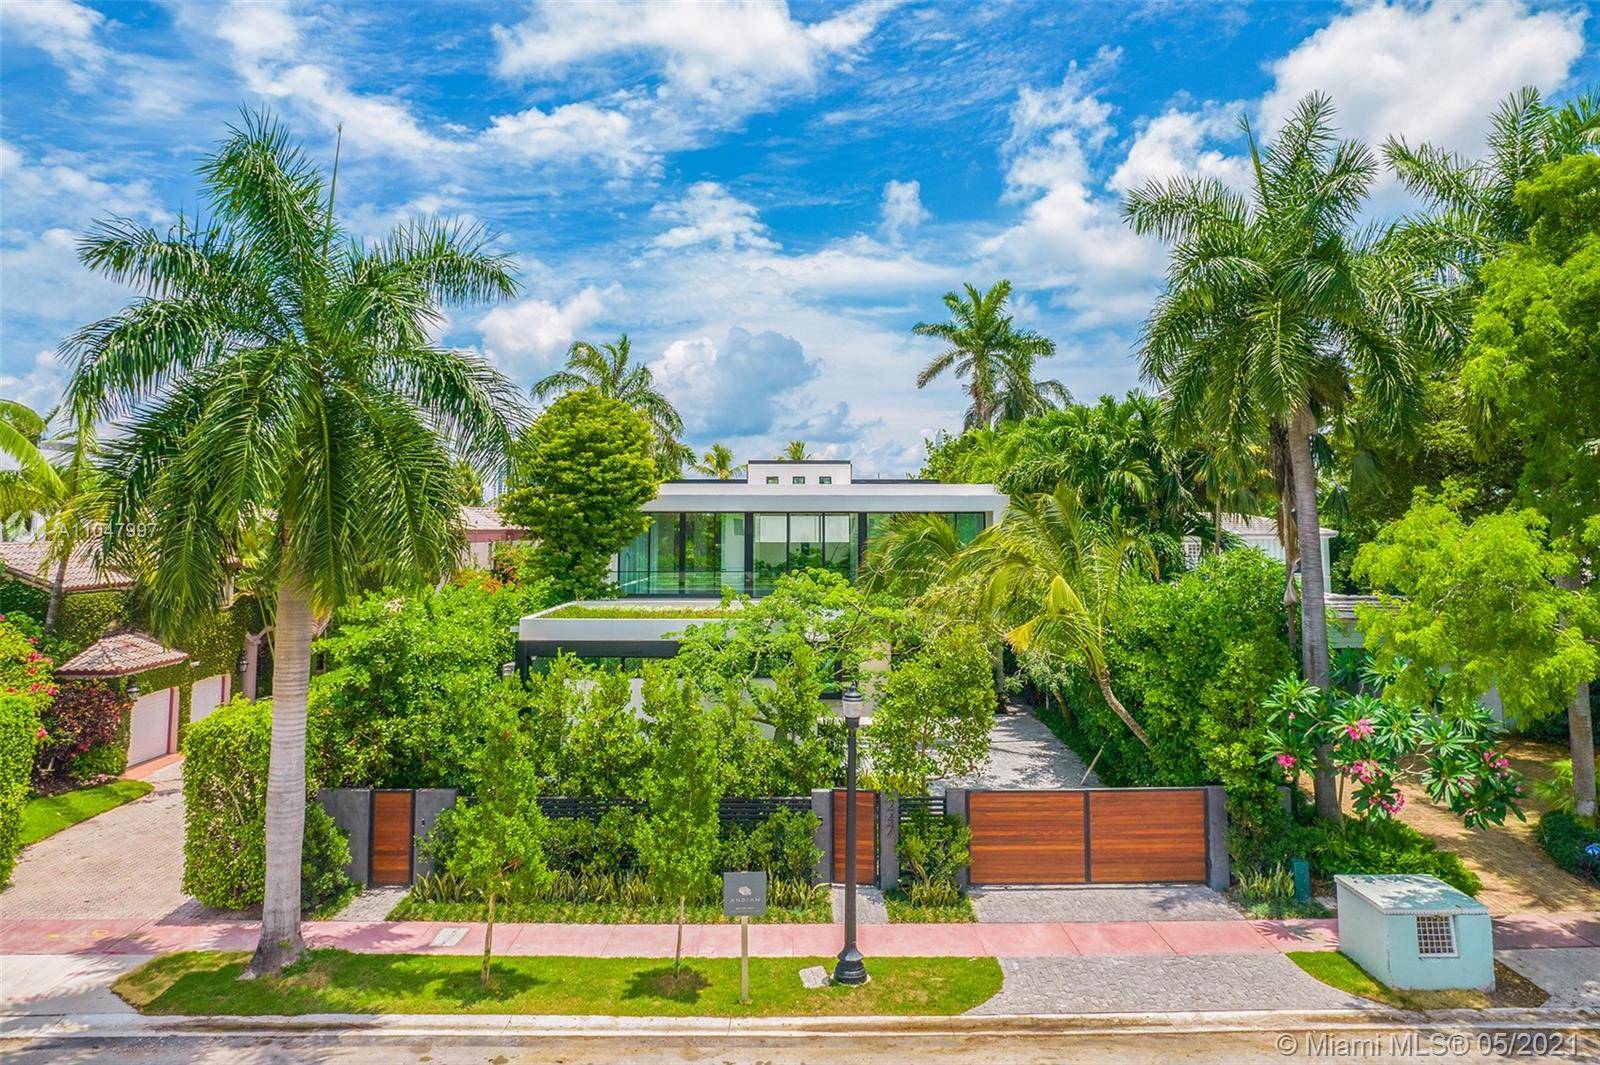 An extraordinary modern waterfront estate offers a completely custom living experience where every space was created to achieve a resort like lifestyle bursting with amenities.